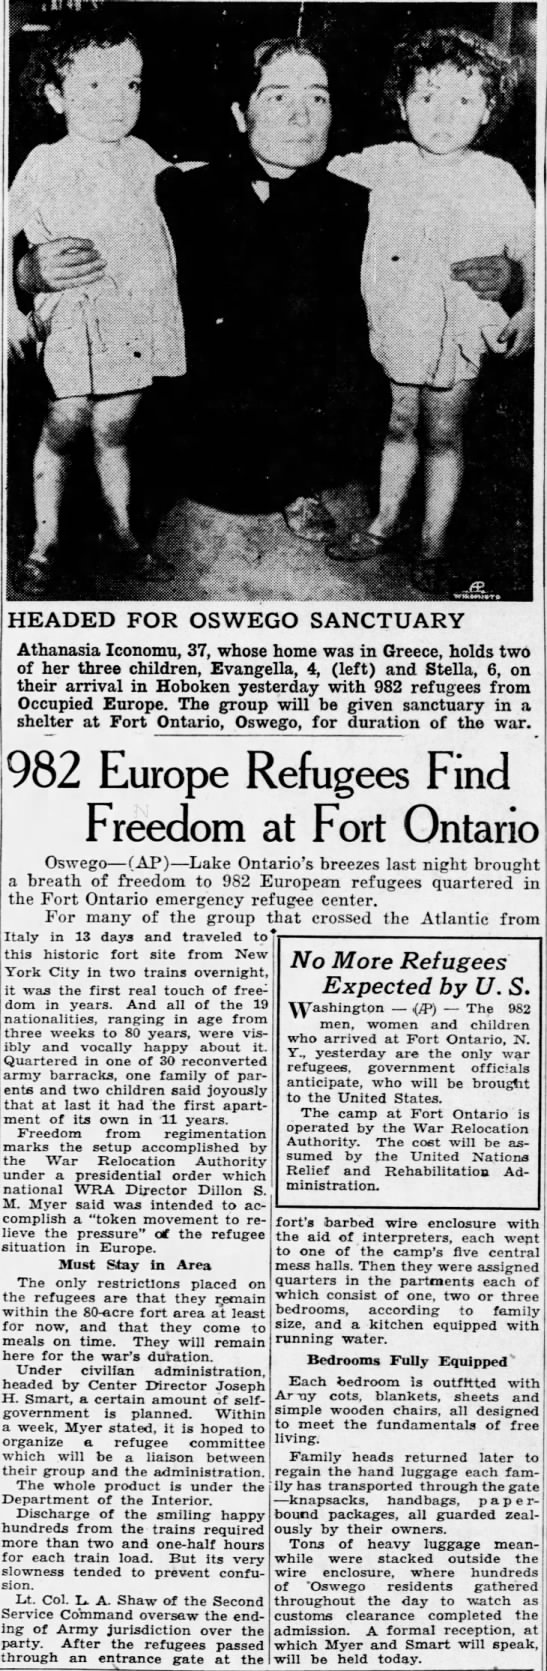 982 Europe Refugees Find Freedom at Fort Ontario (8/6/44) - 